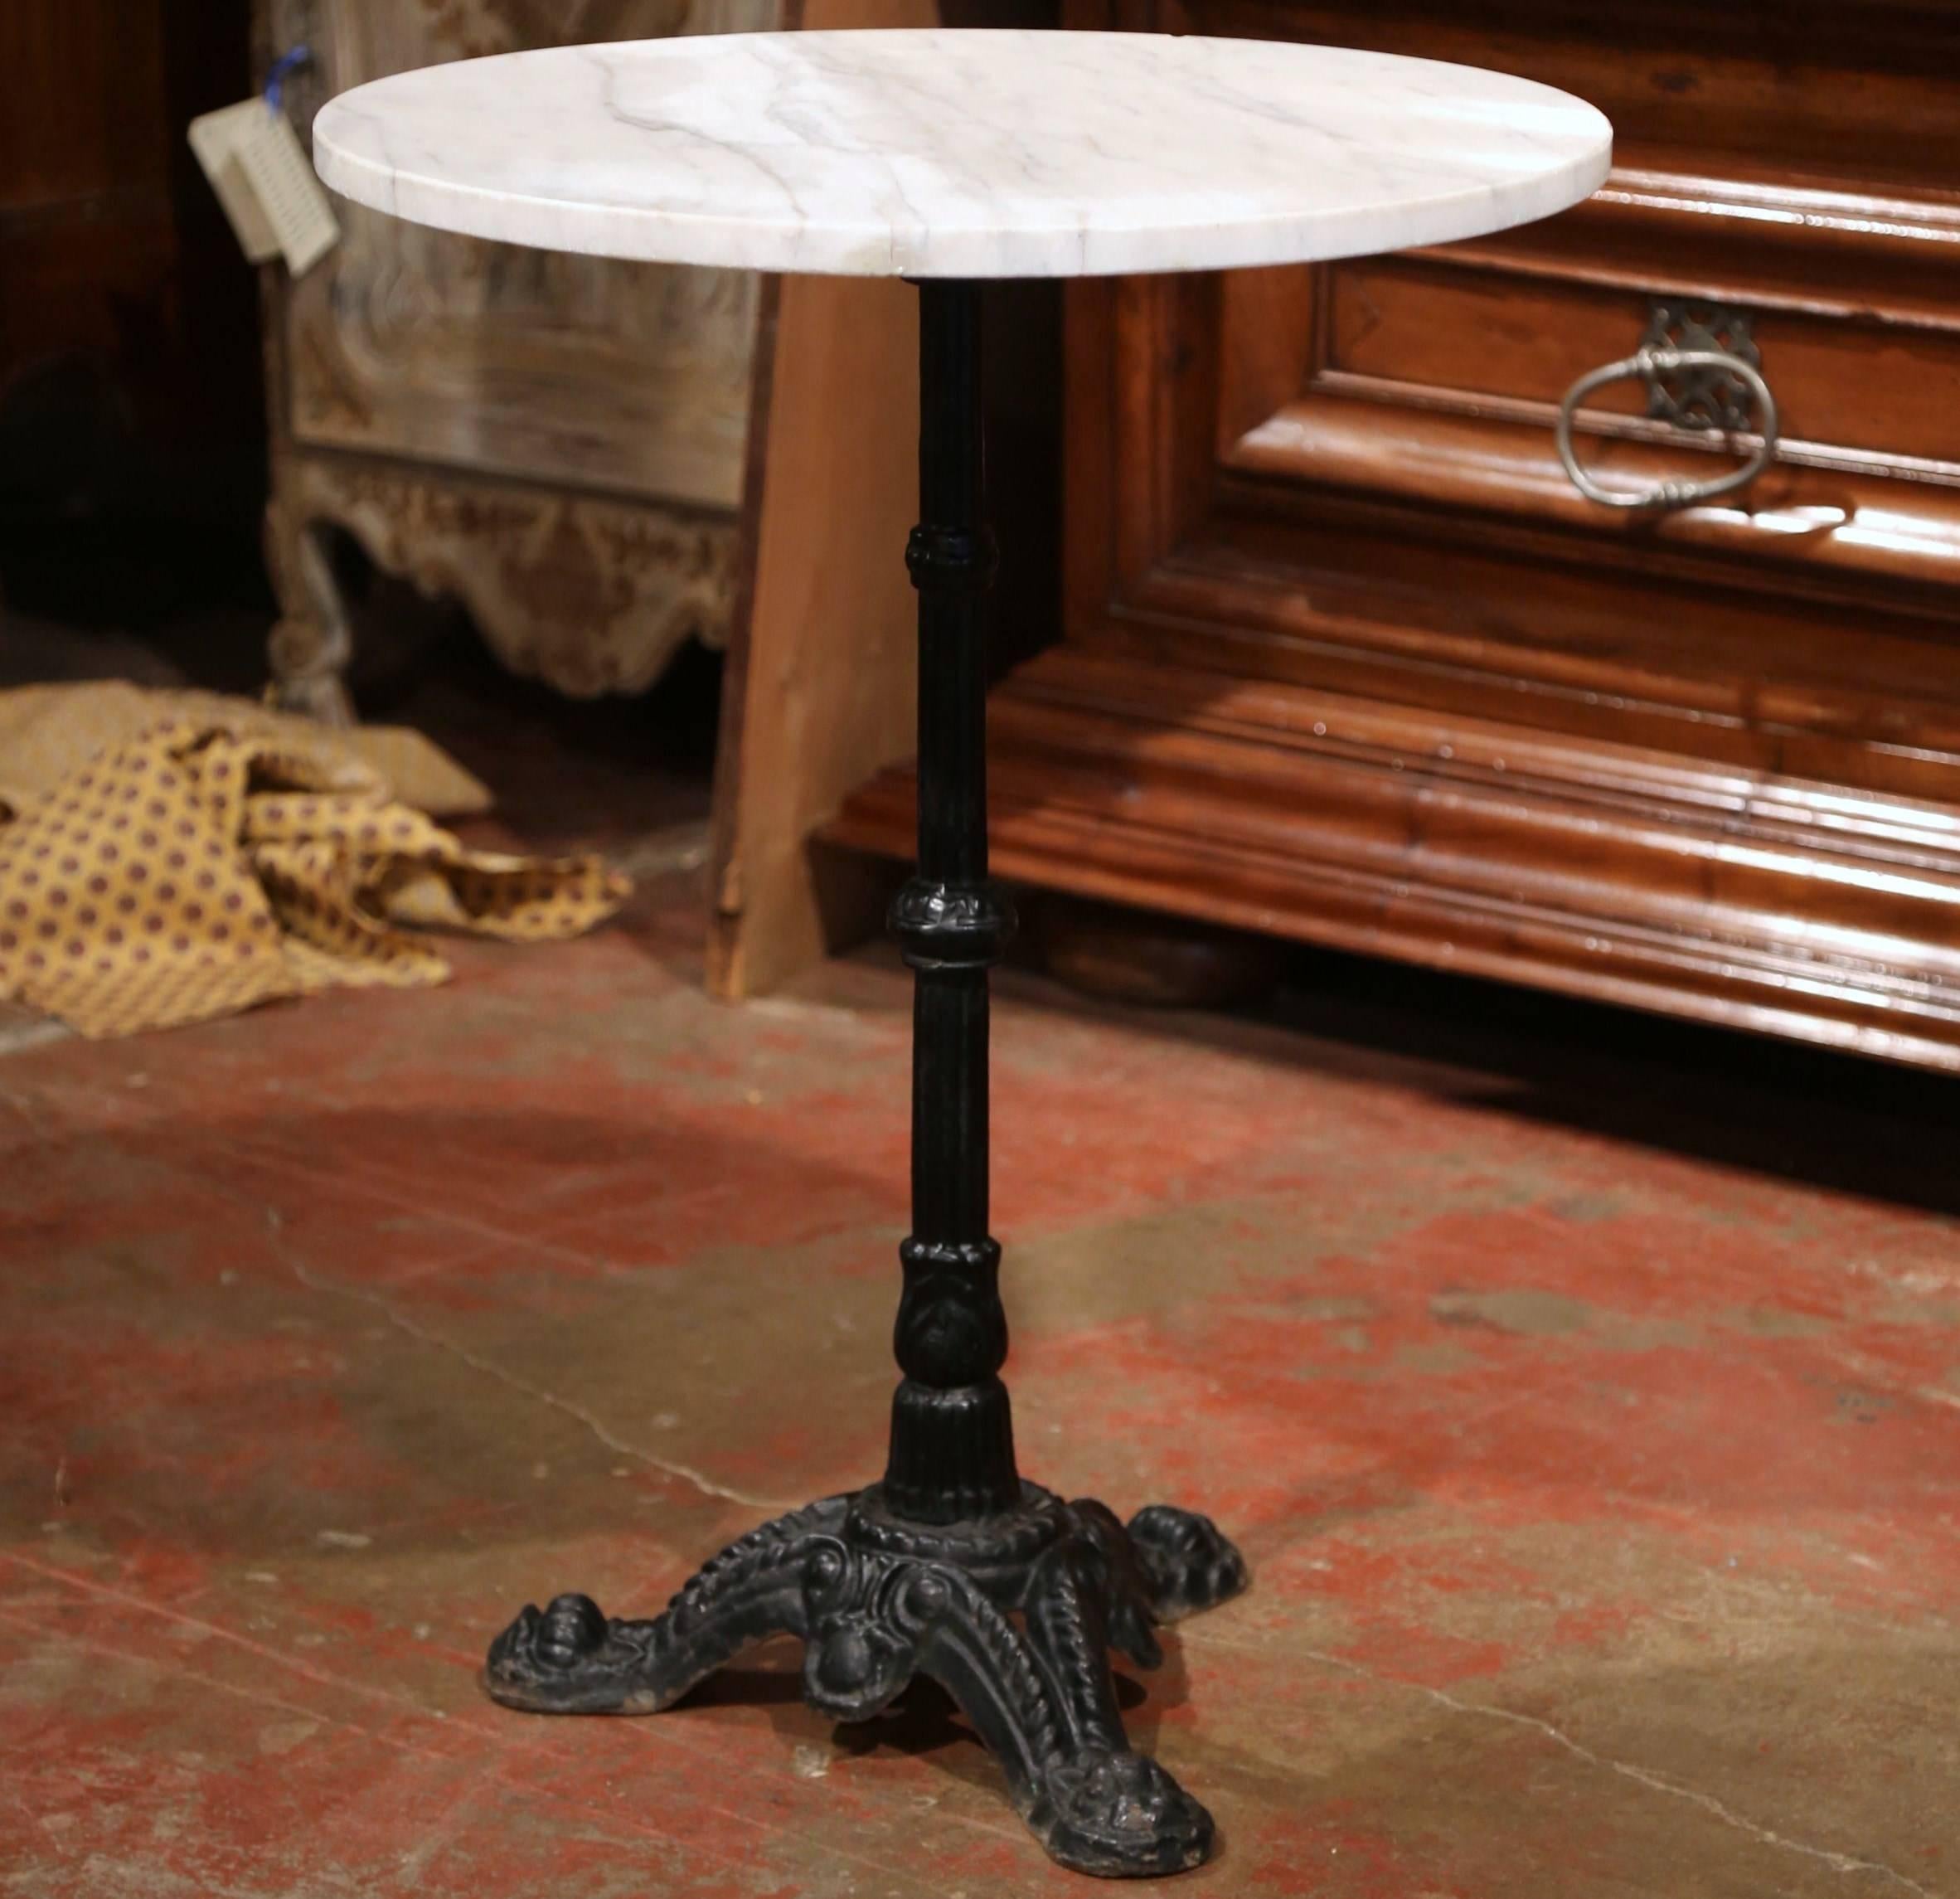 This exquisite, antique Napoleon III gueridon was crafted in Paris, France, circa 1870. The classic bistrot table features a round white marble top with grey veins and a long, thin iron base with three paw feet. The French pedestal base is in